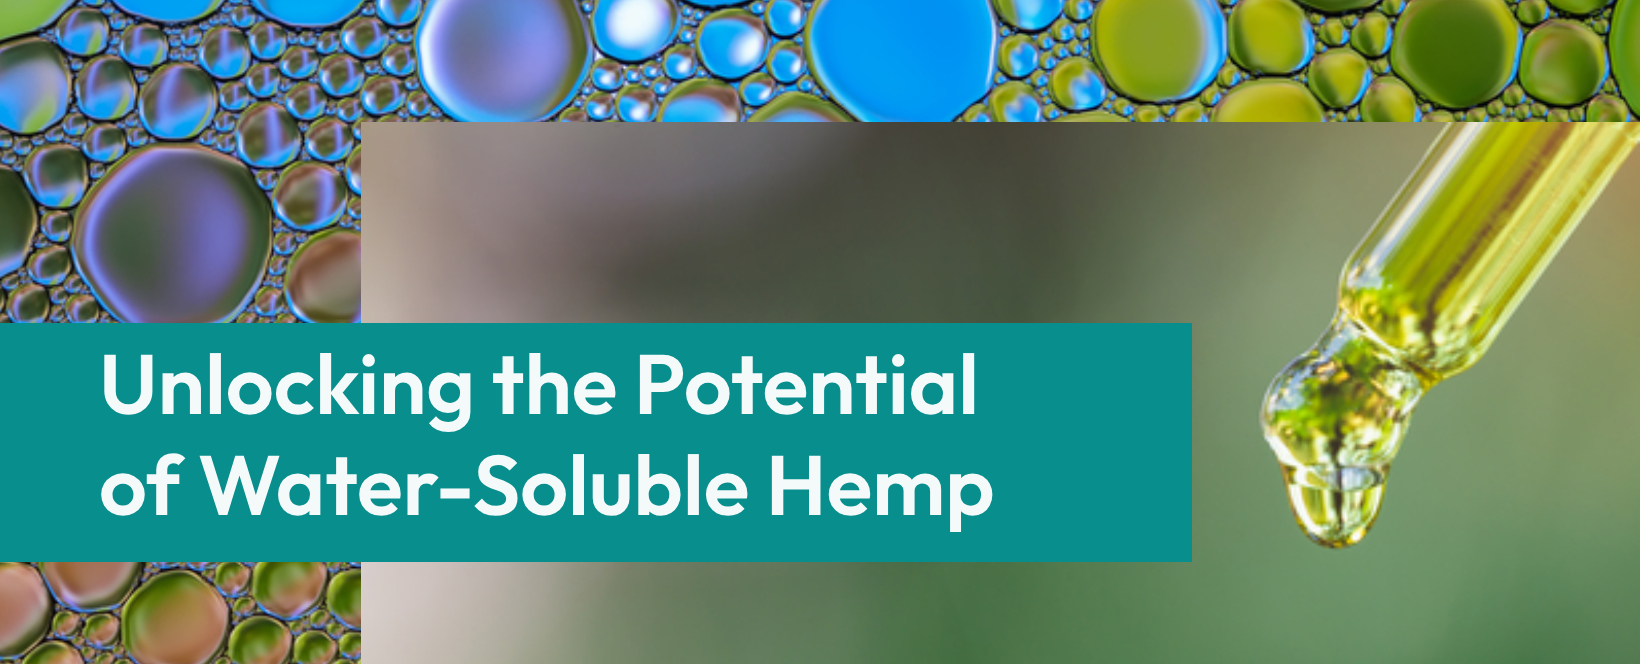 Unlocking the Potential of Water-Soluble Hemp: The Impact of Nanocarriers on Hemp Oil Solubility and Effectiveness